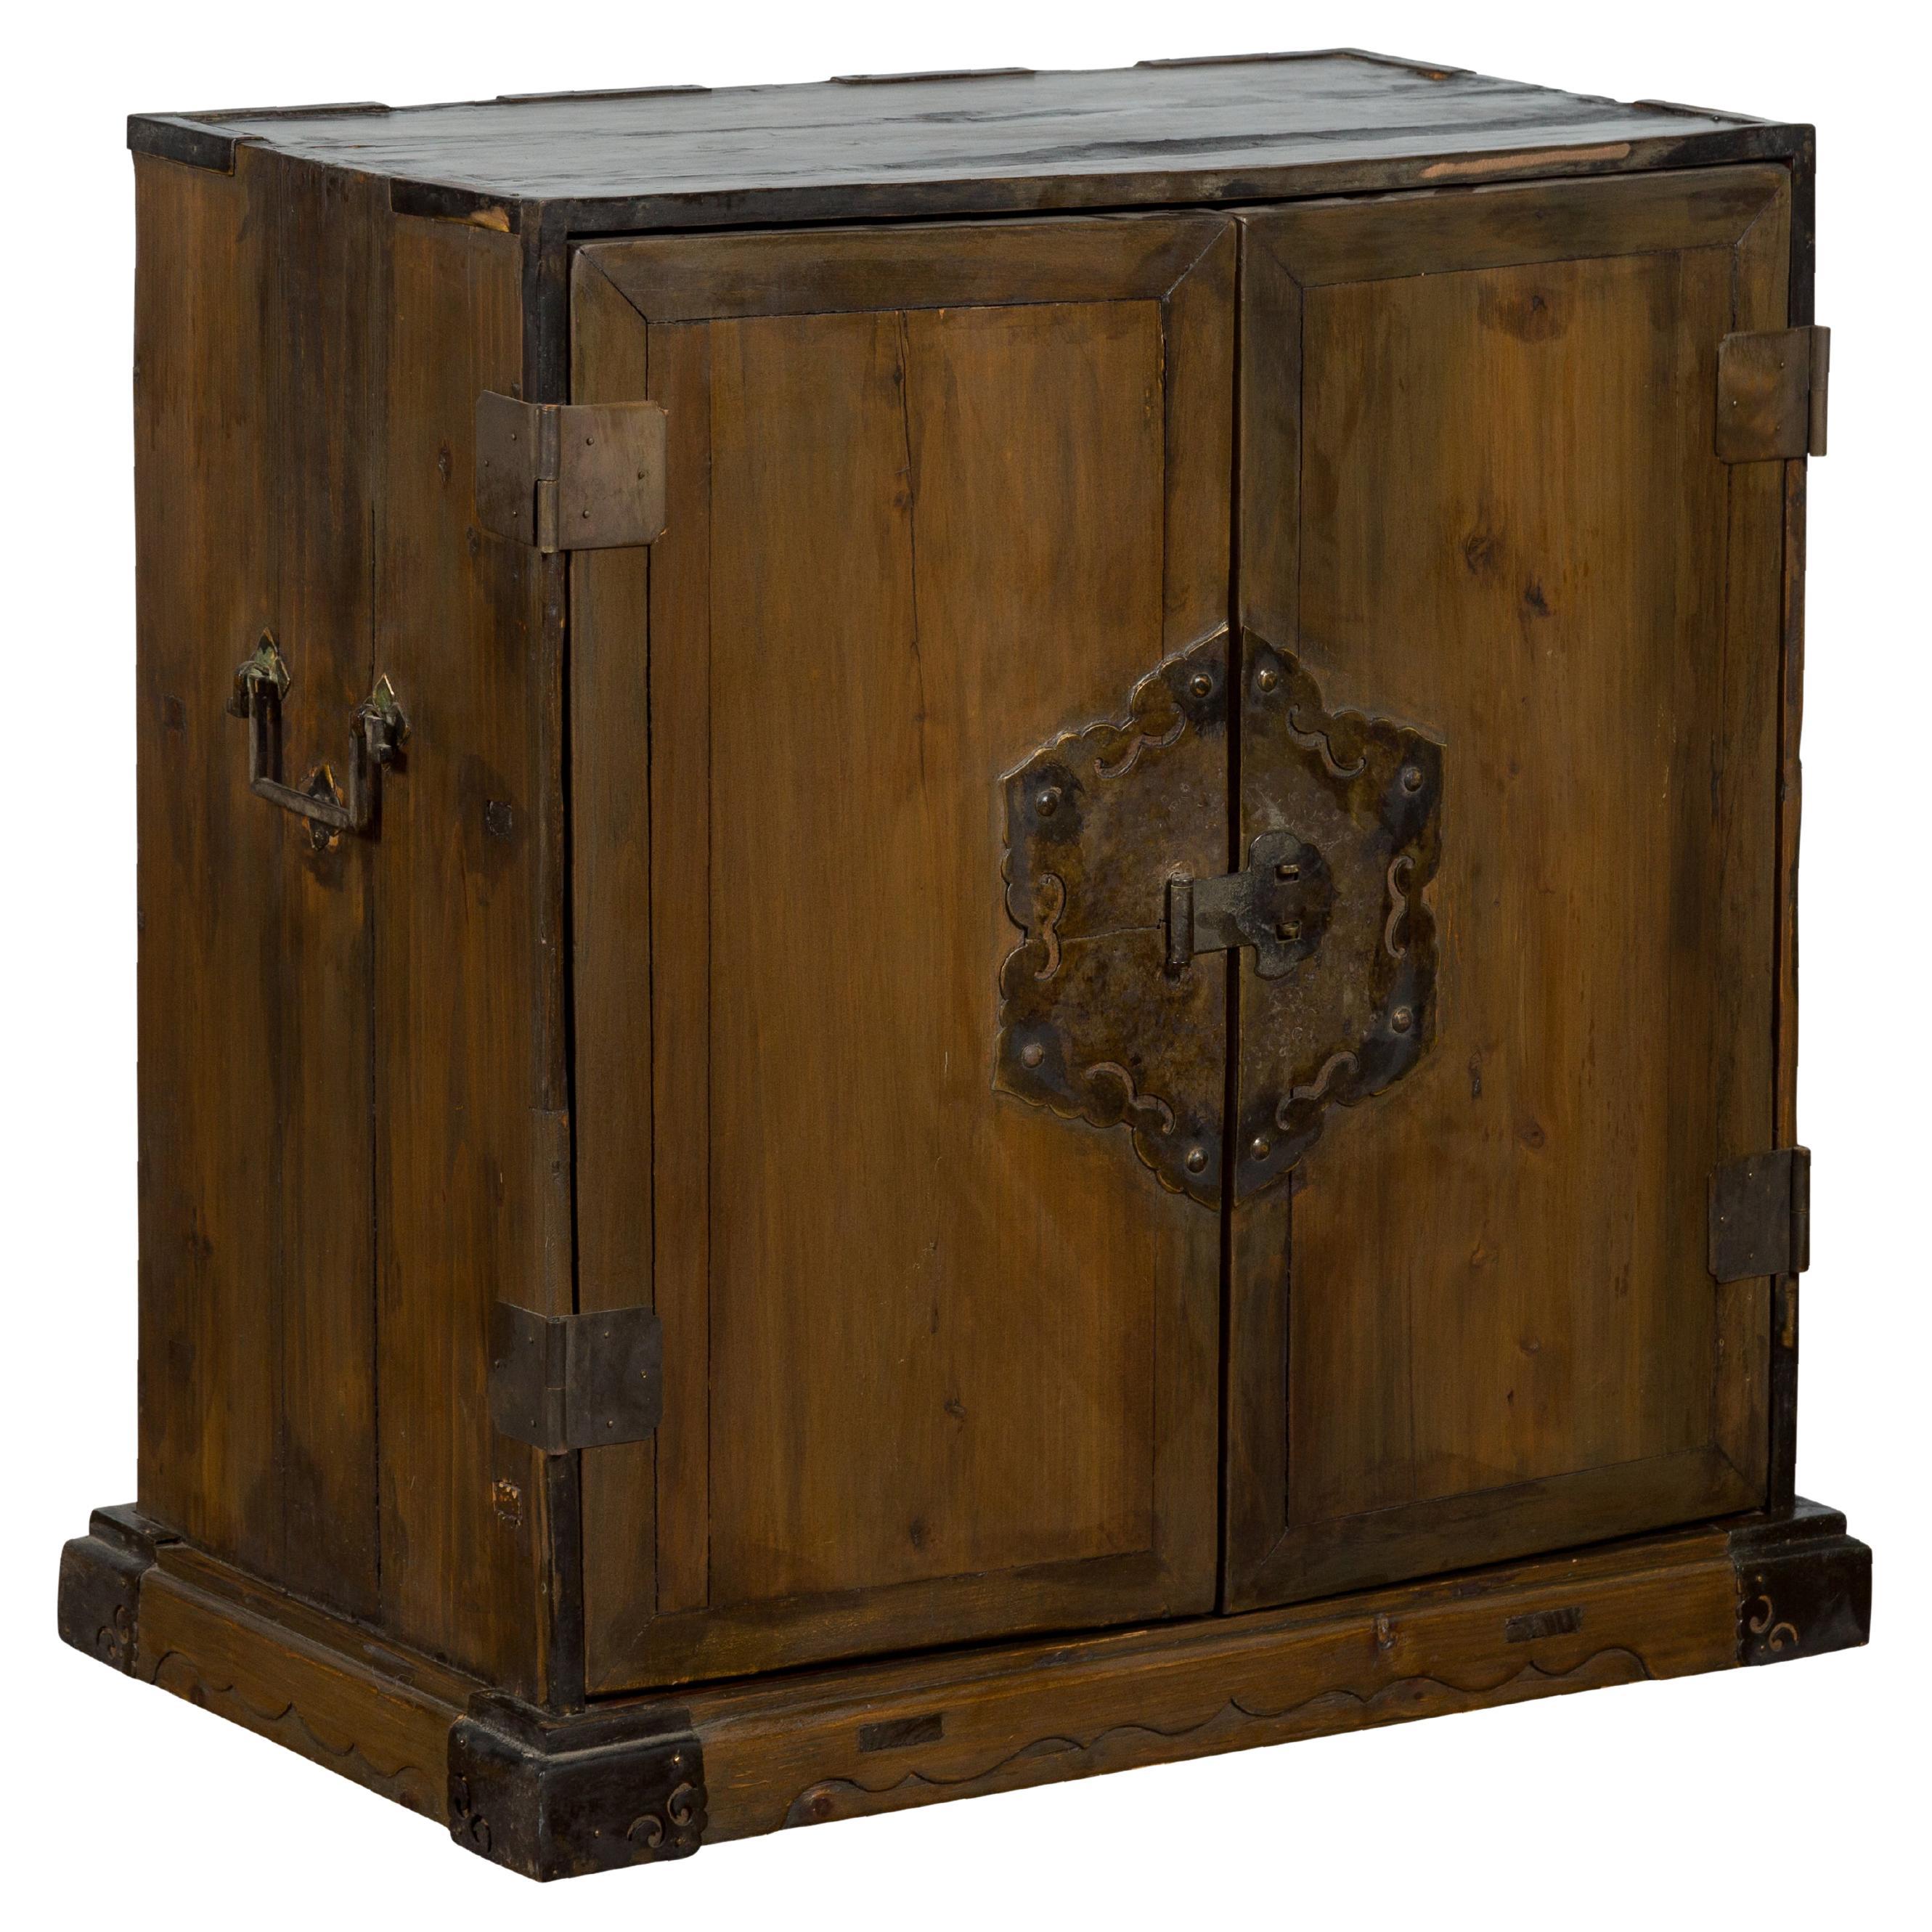 A Chinese Qing Dynasty Period 19th Century Carrying Chest with Lateral Handles